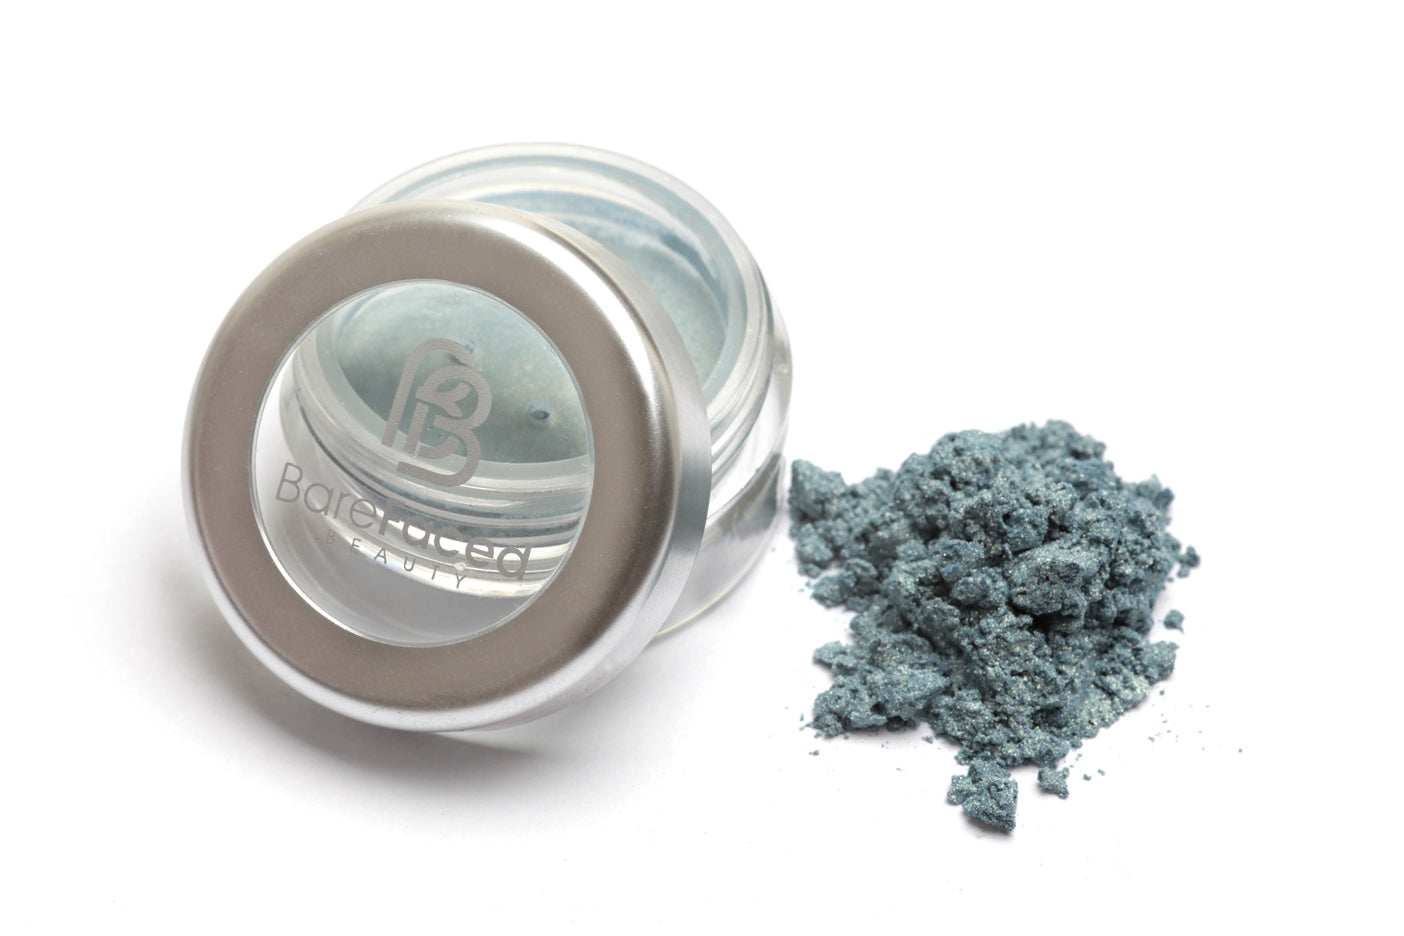 A small round pot of mineral eyeshadow, with a swatch of the powder next to it showing a light shimmery aqua shade